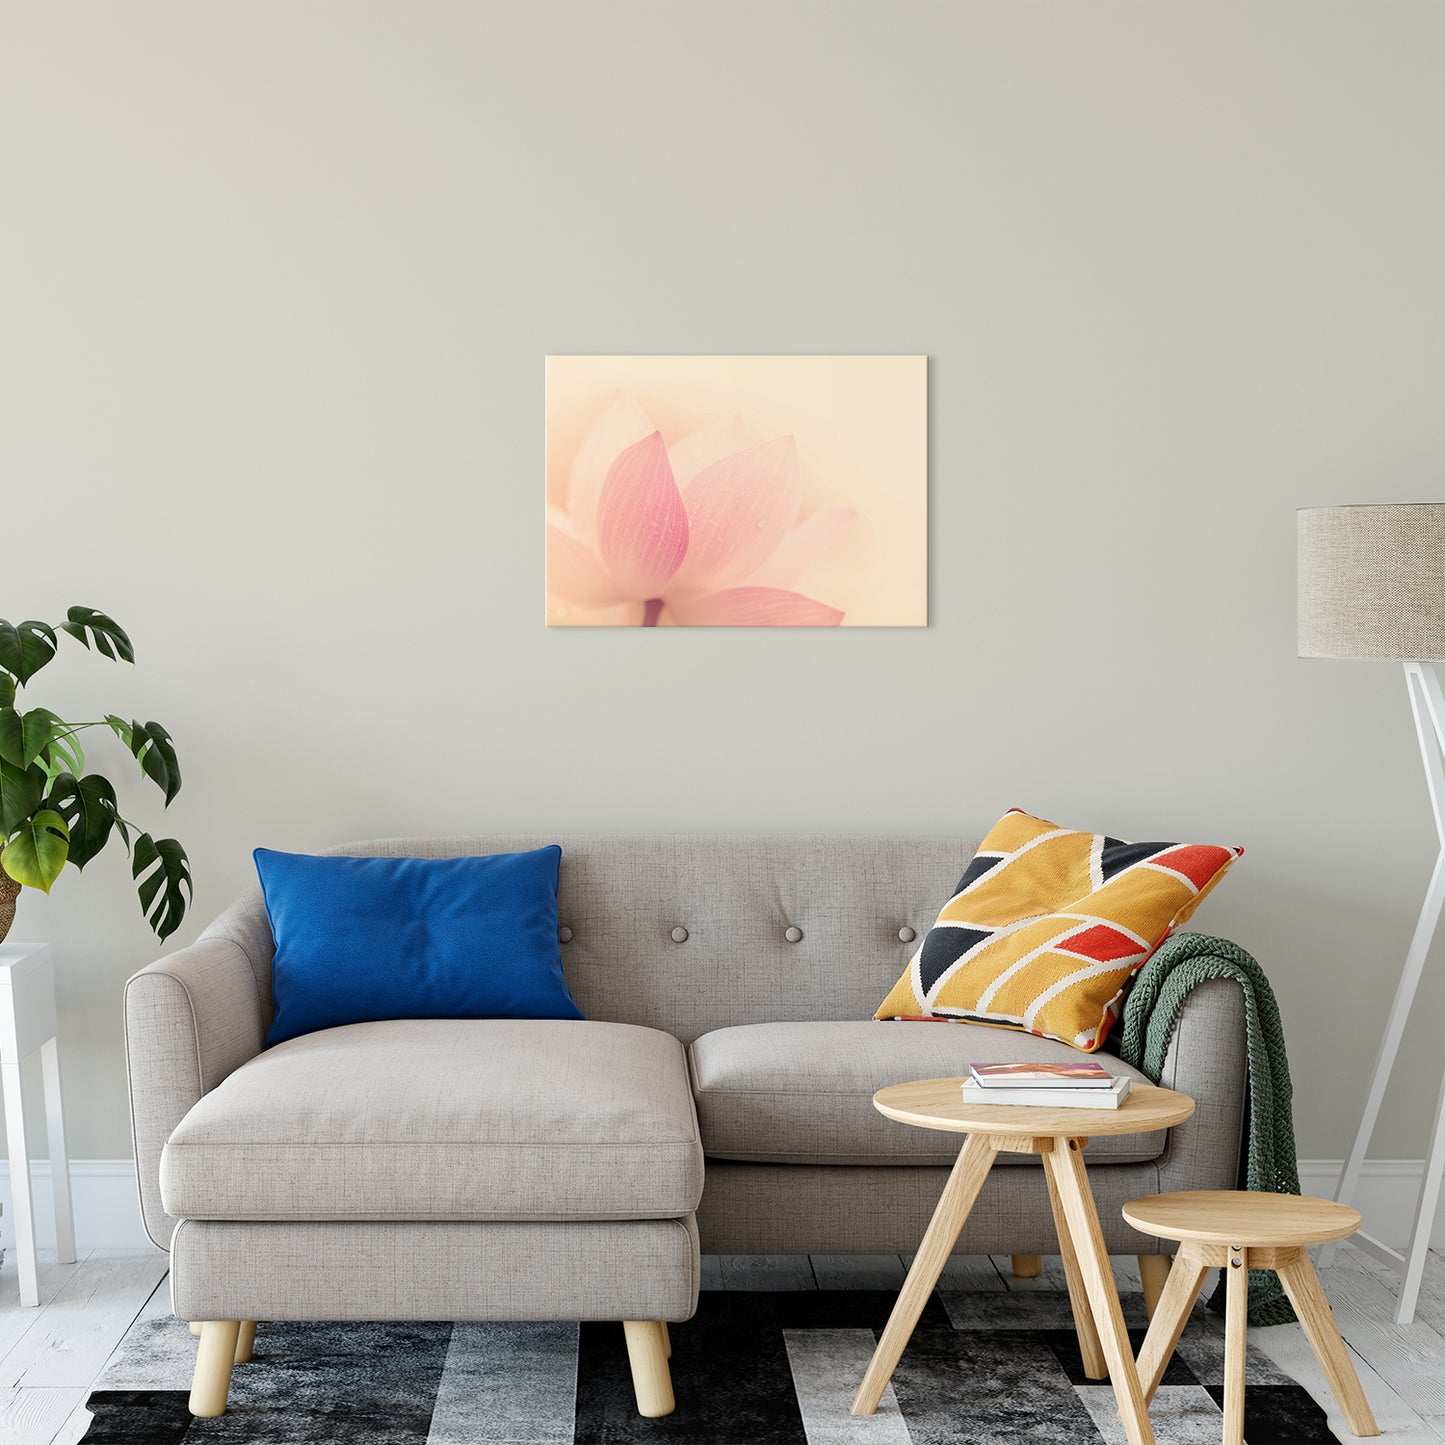 Tranquil Close-up Pink Lotus Petal Fine Art Canvas Print 20" x 30" - PIPAFINEART